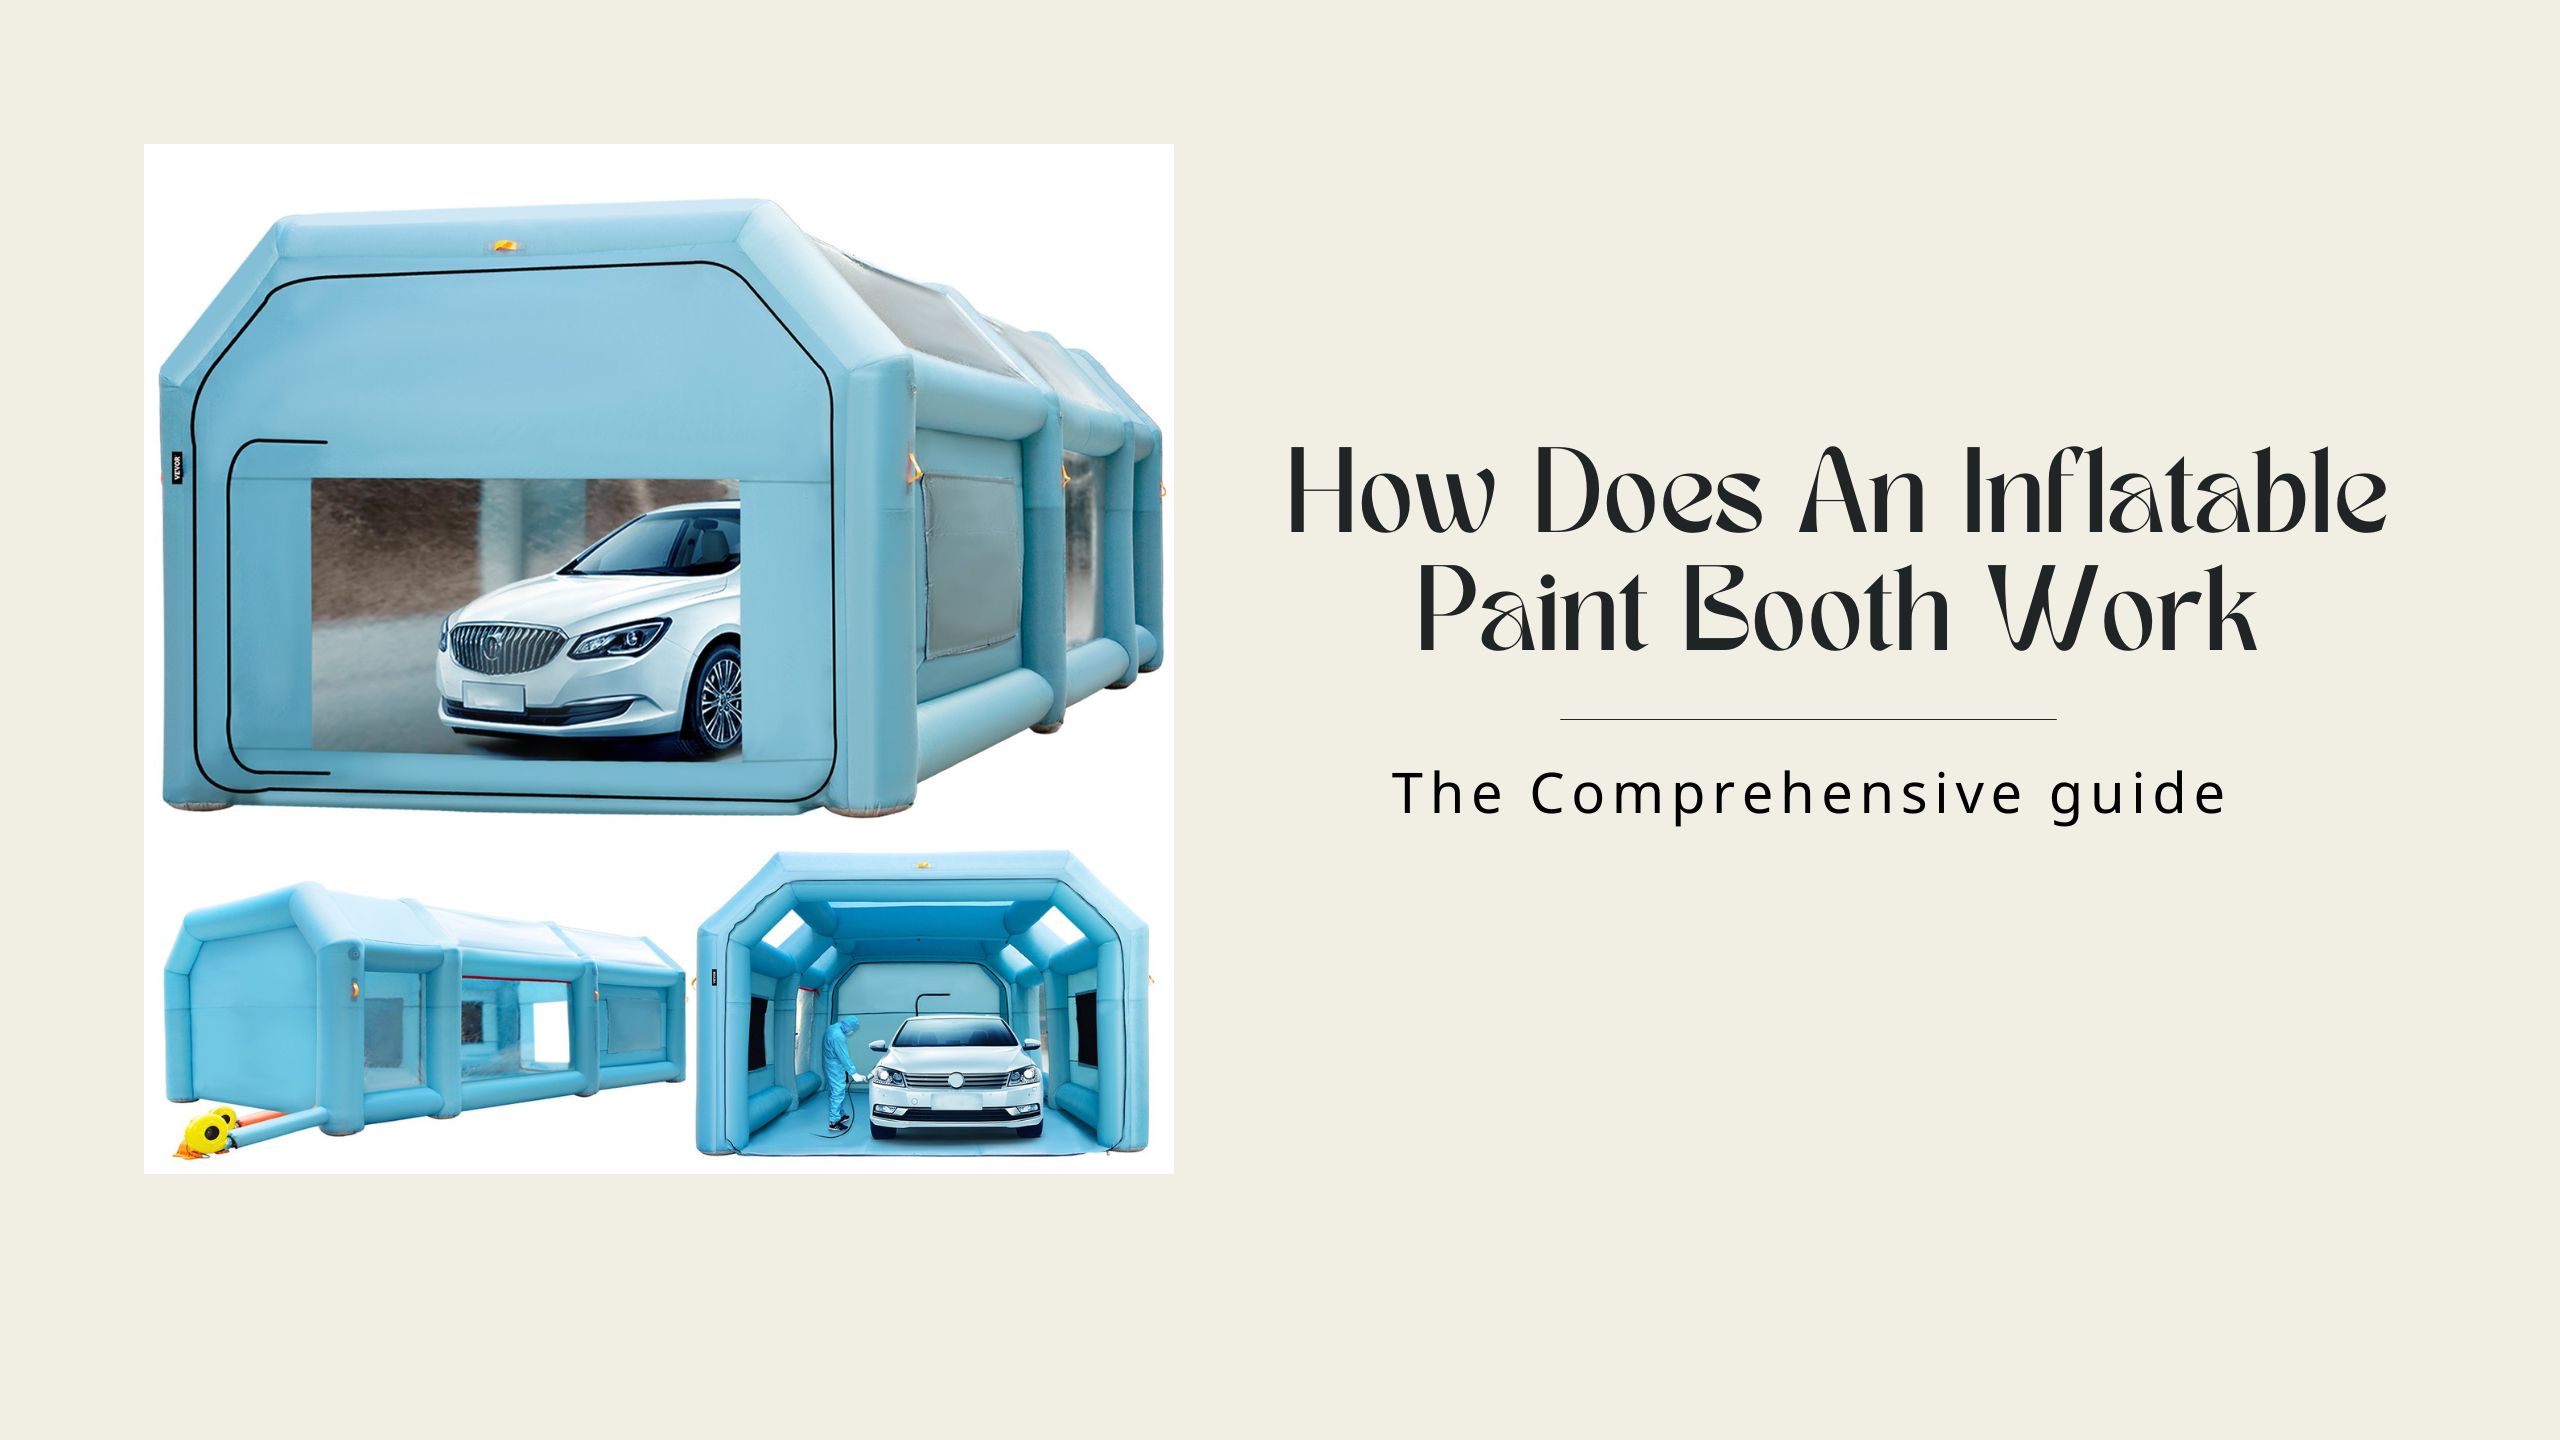 How does an inflatable paint booth work